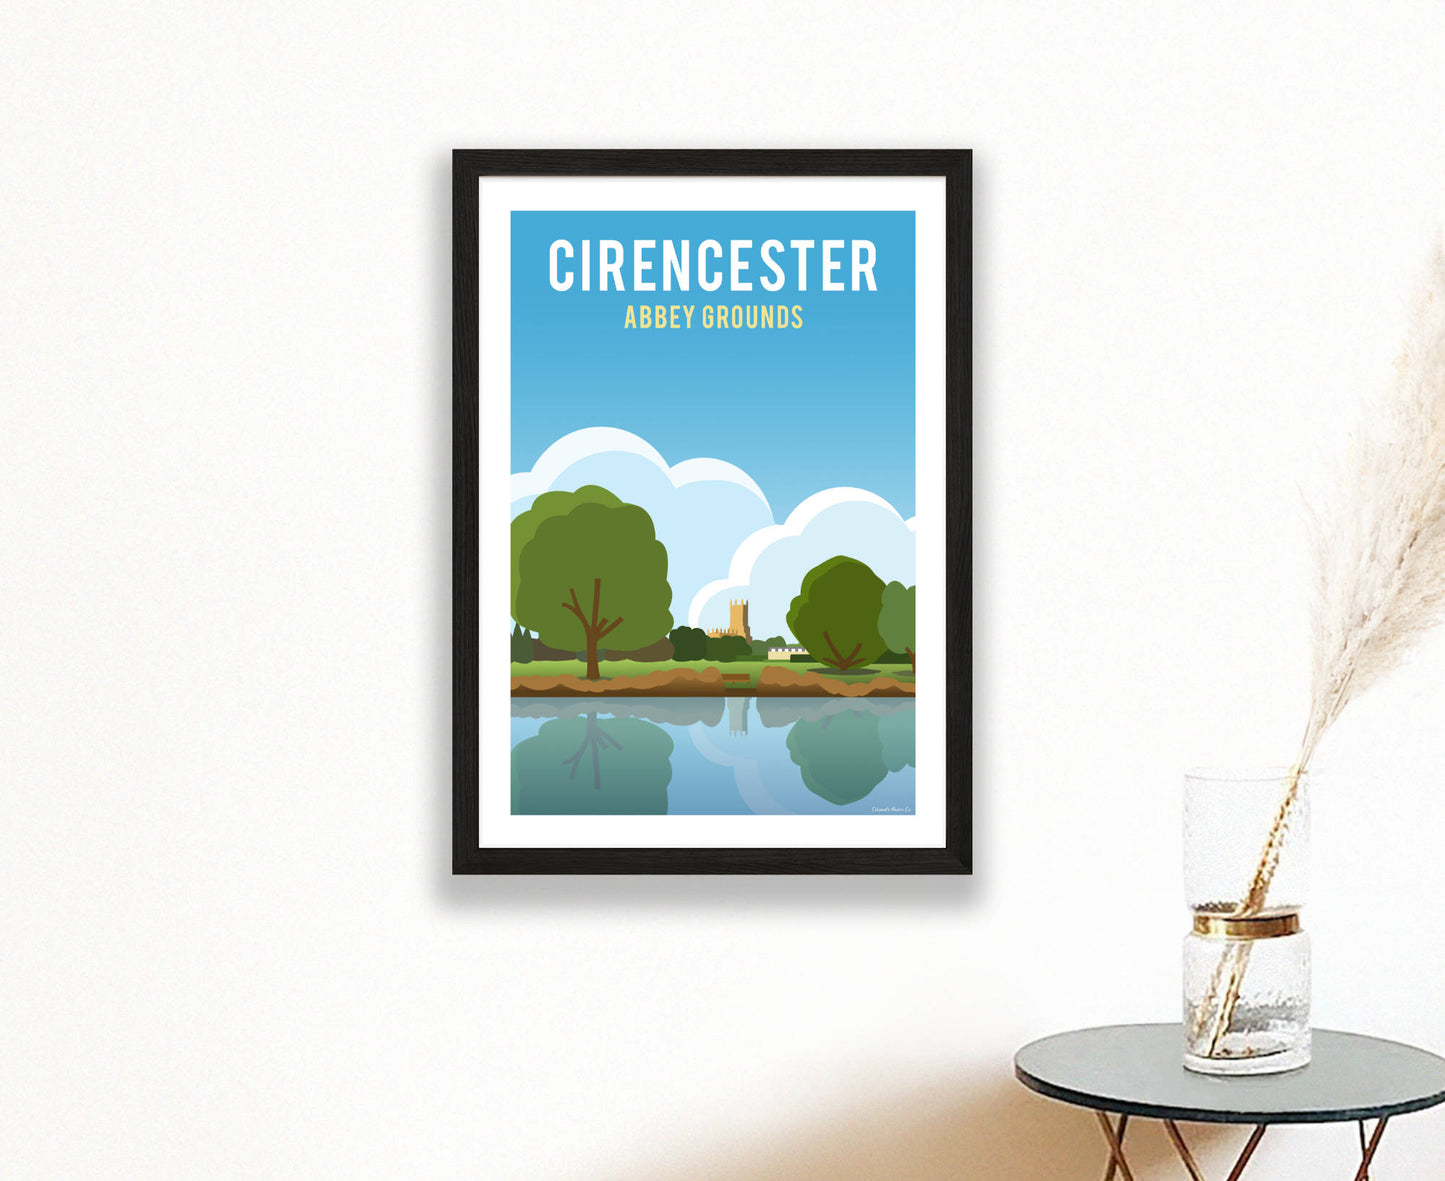 Cirencester Abbey Grounds Poster in black frame